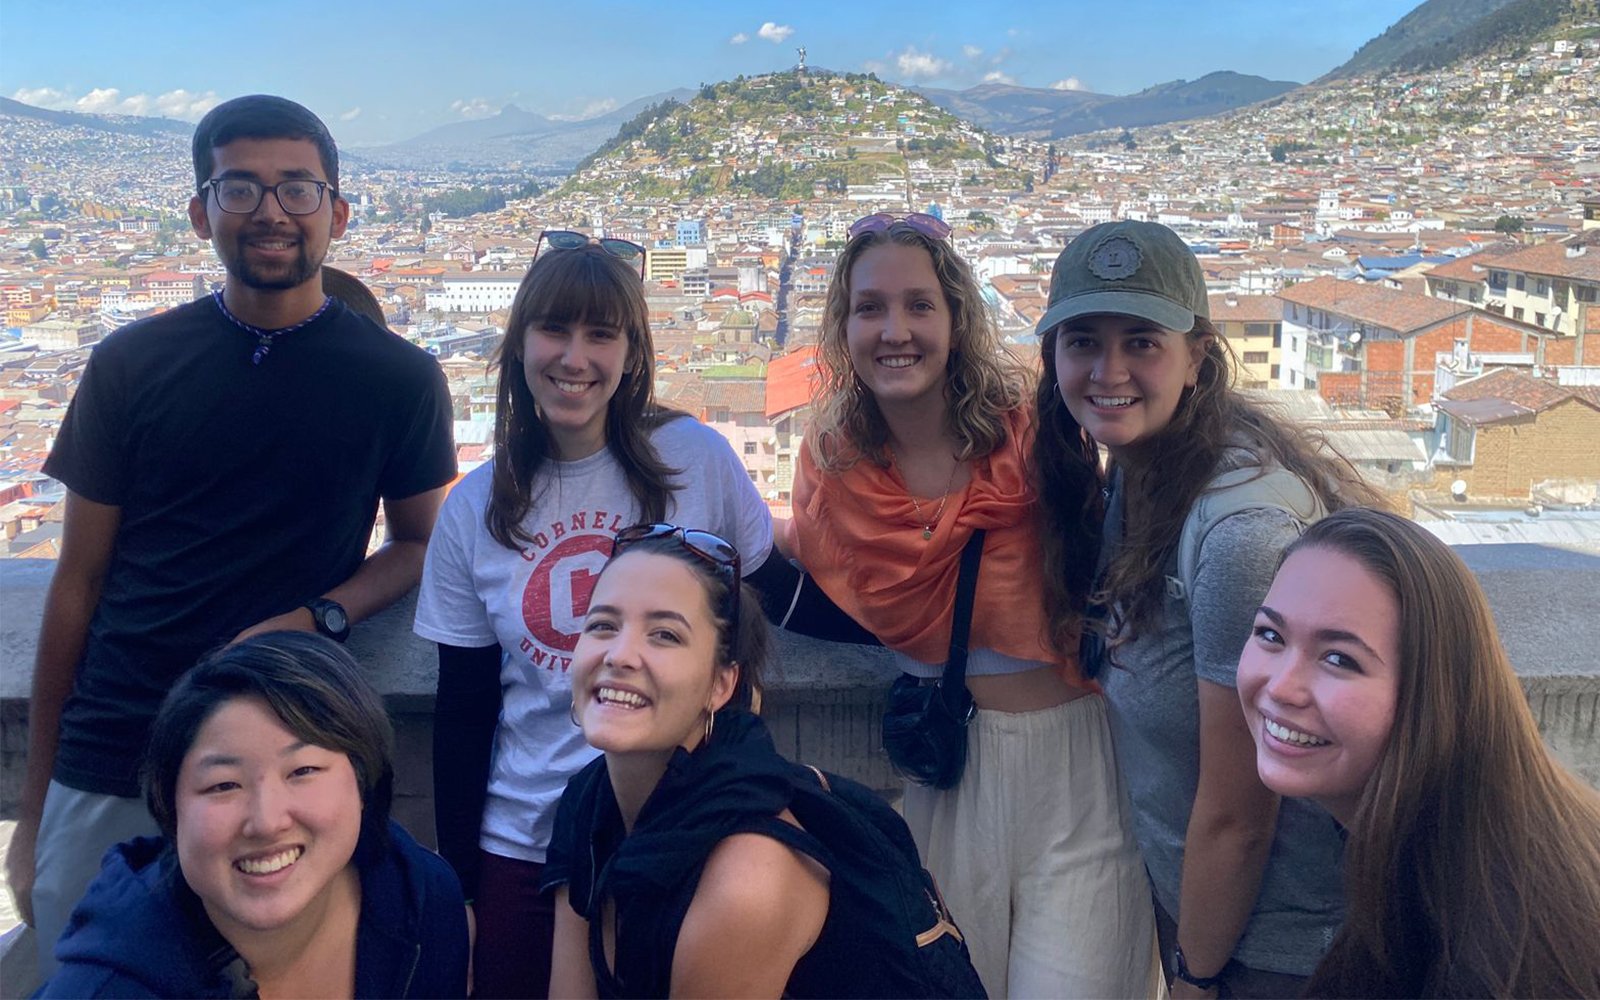 Group of students leaning against a wall on a mountain peak with view of town in background